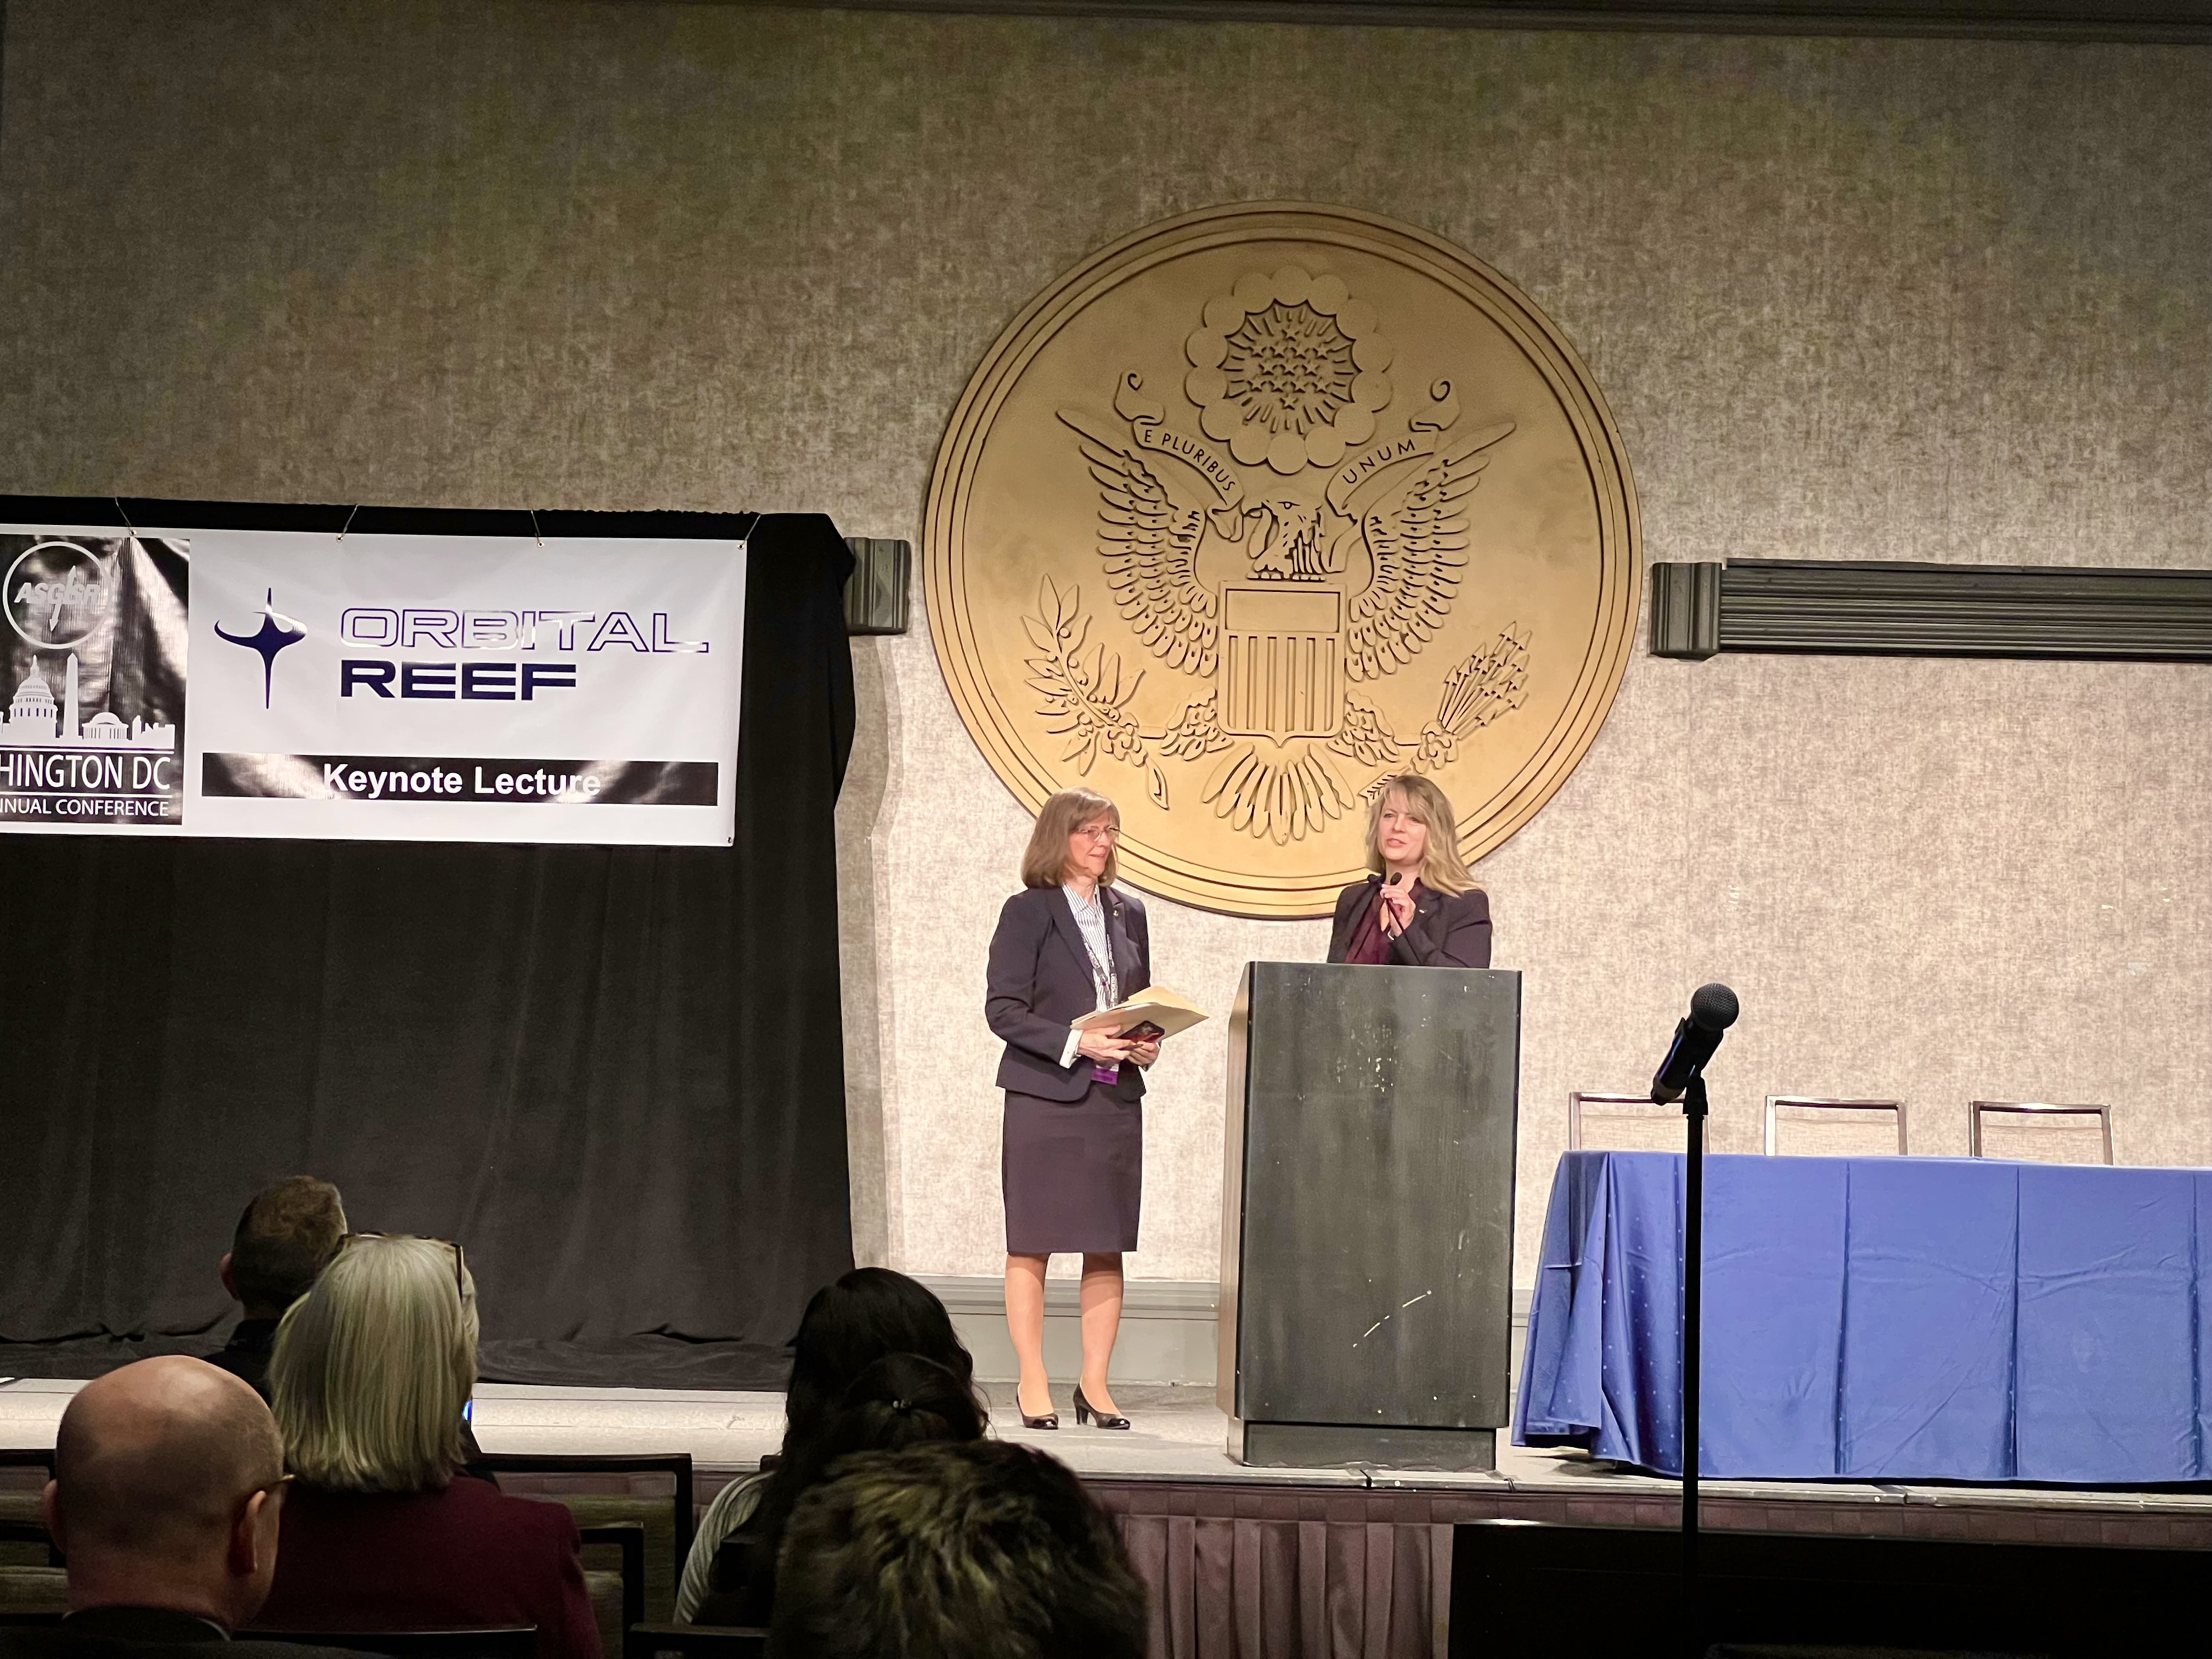 Dr. Lisa Carnell (right) and Dr. Bonnie Dunbar (left) on stage presenting at the main conference podium. Both women are wearing dark, formal business attire.